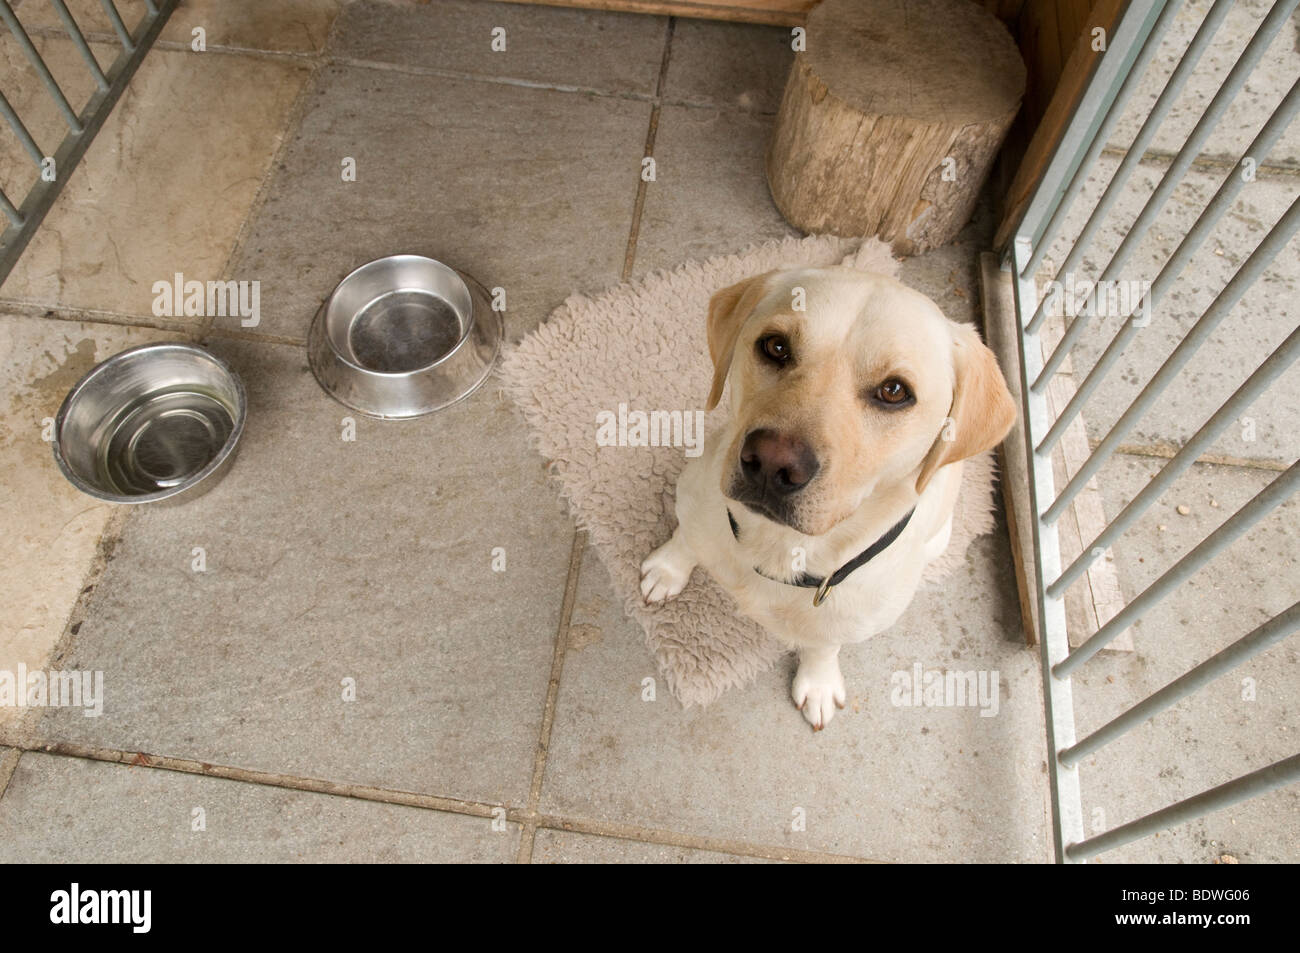 Yellow Labrador dog sitting in a dog kennel Stock Photo